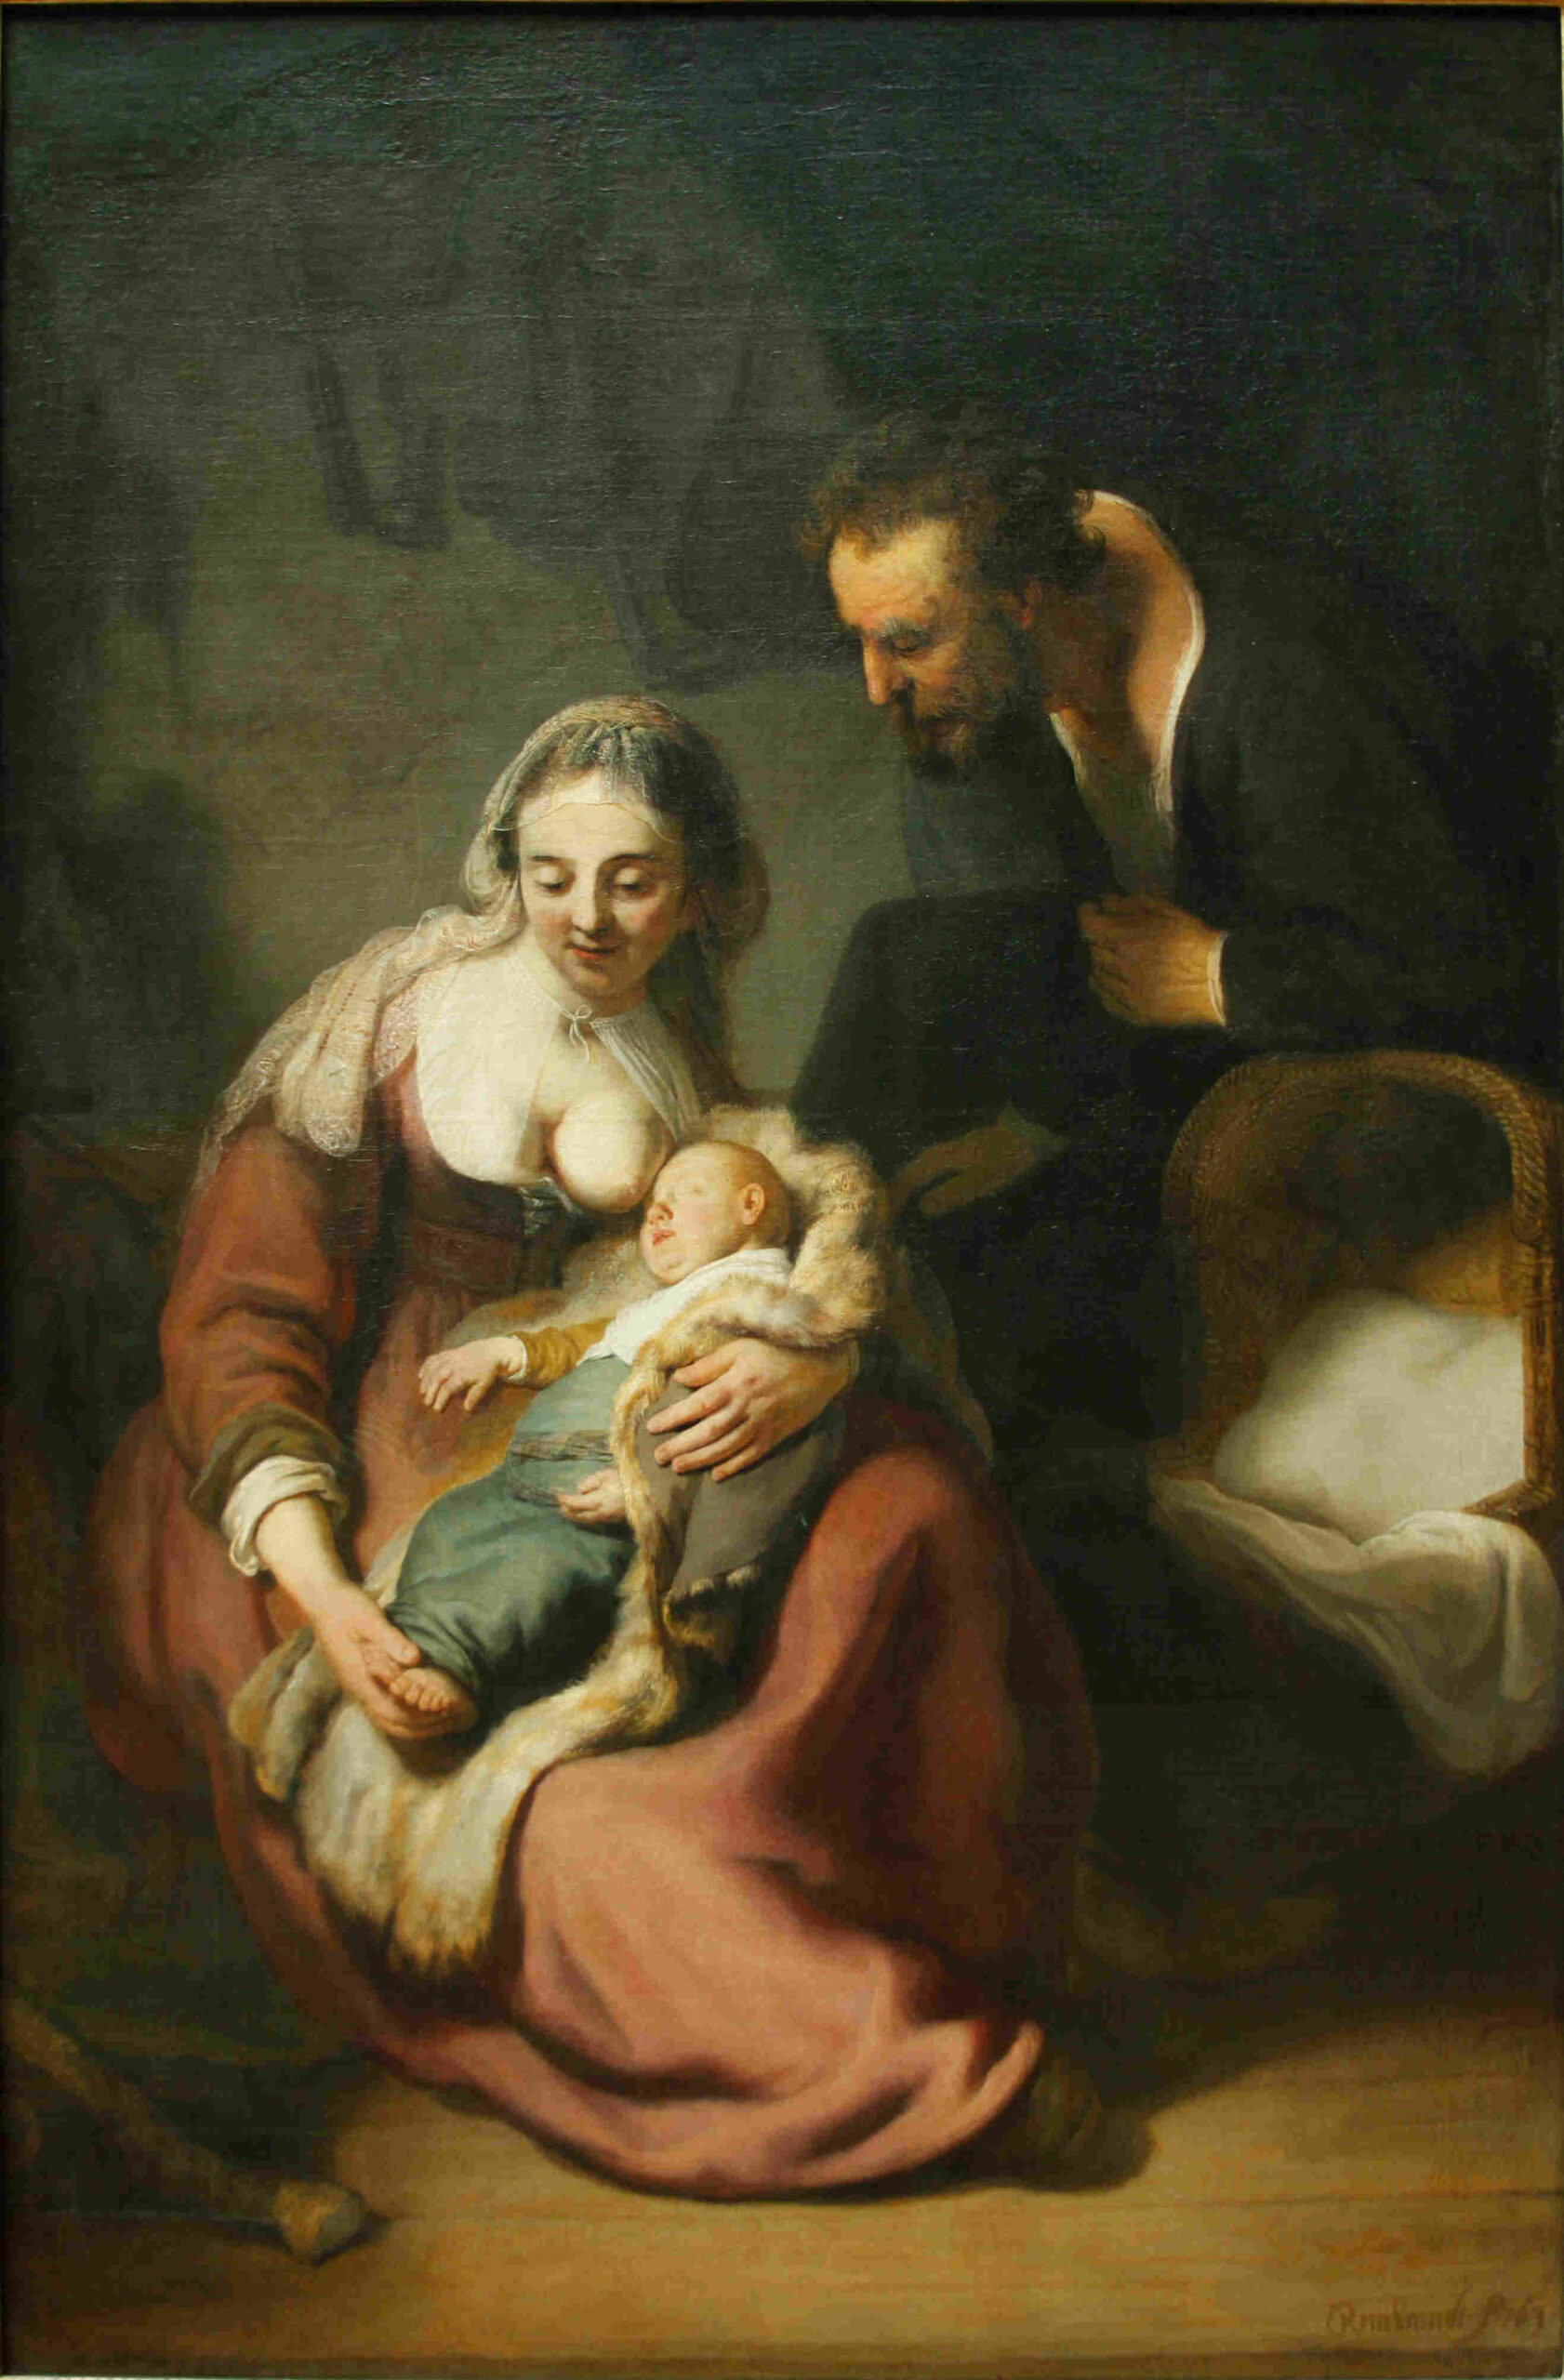 1634 Rembrandt_-_The_Holy_Family_alte pinacothek Munich reduit